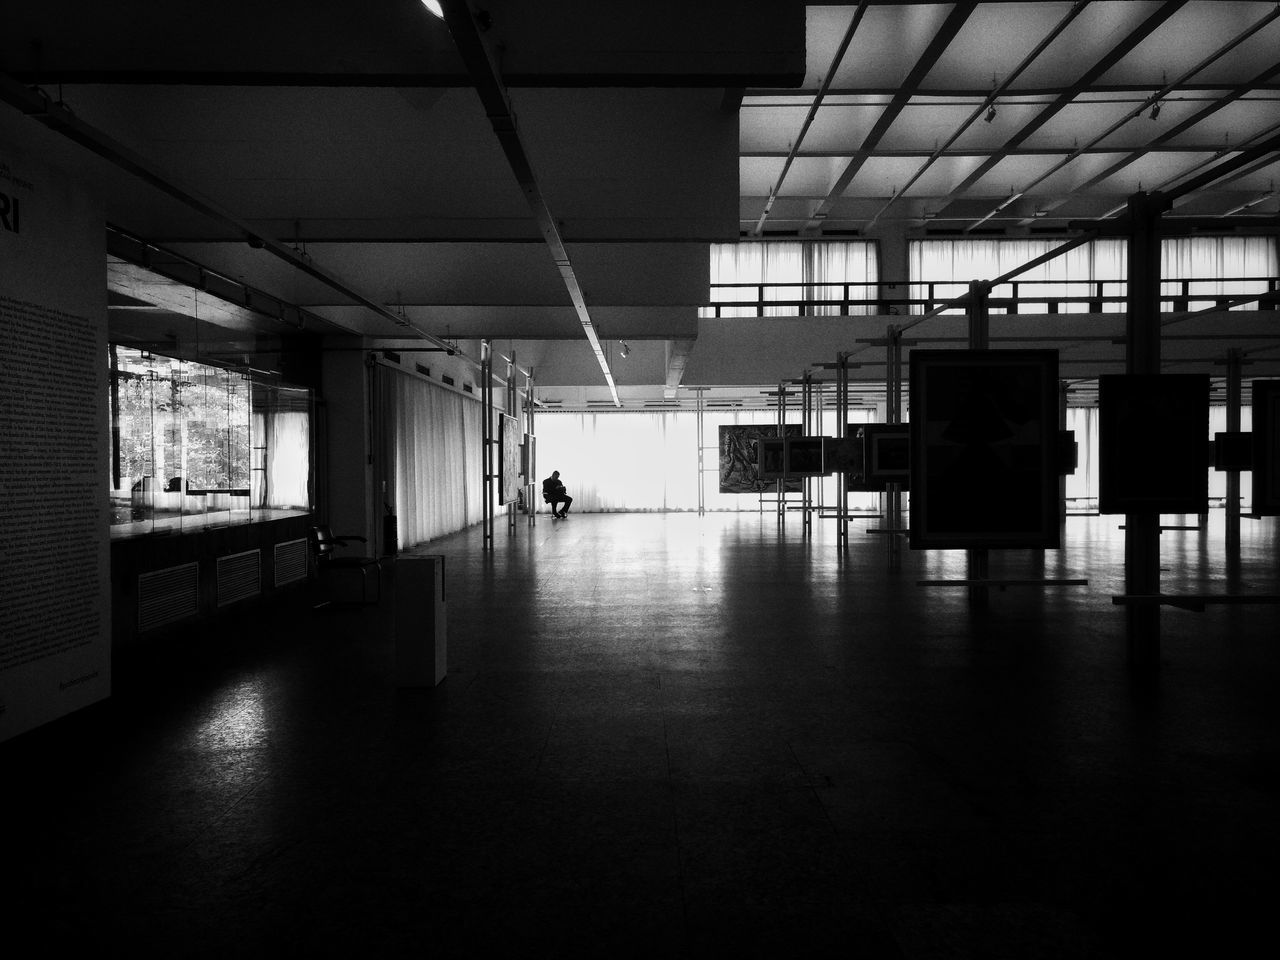 indoors, full length, architecture, walking, built structure, ceiling, distant, day, underpass, the way forward, city life